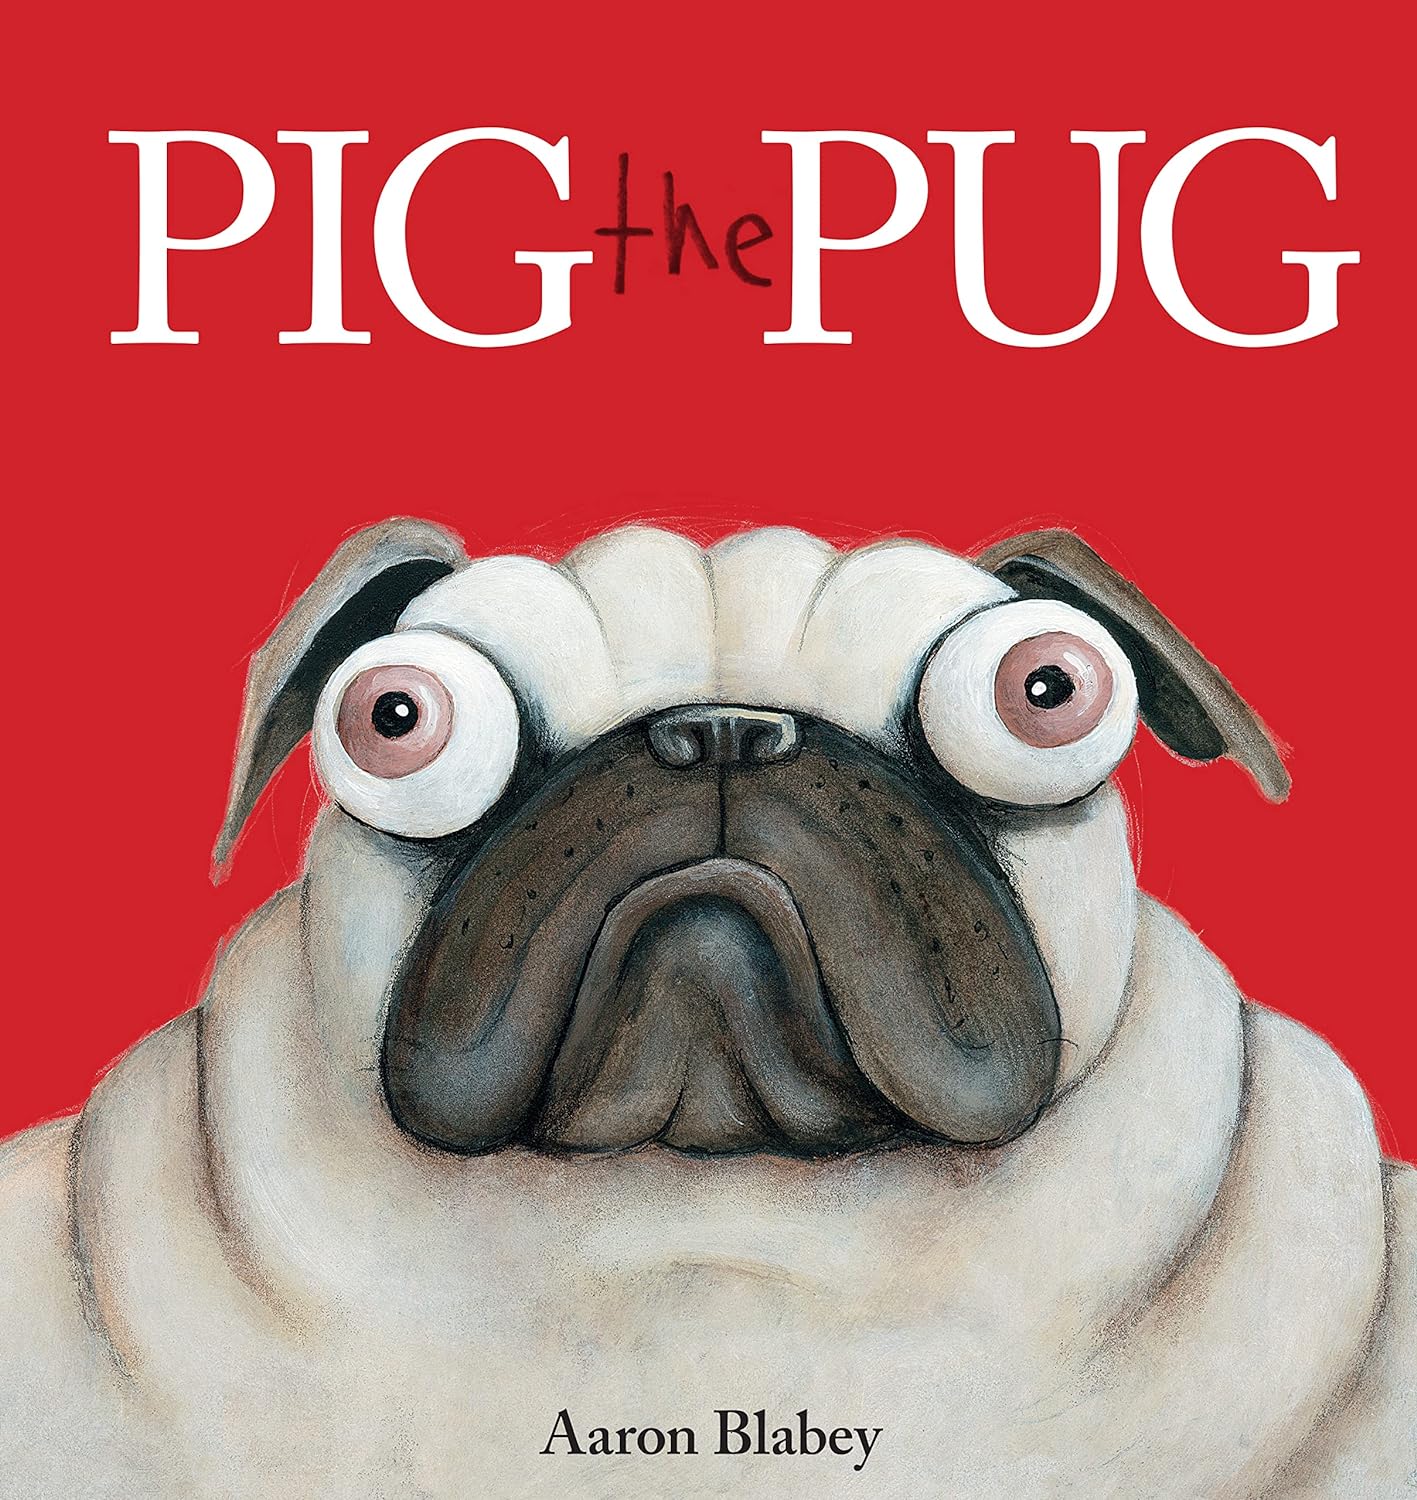 image of pig the pug